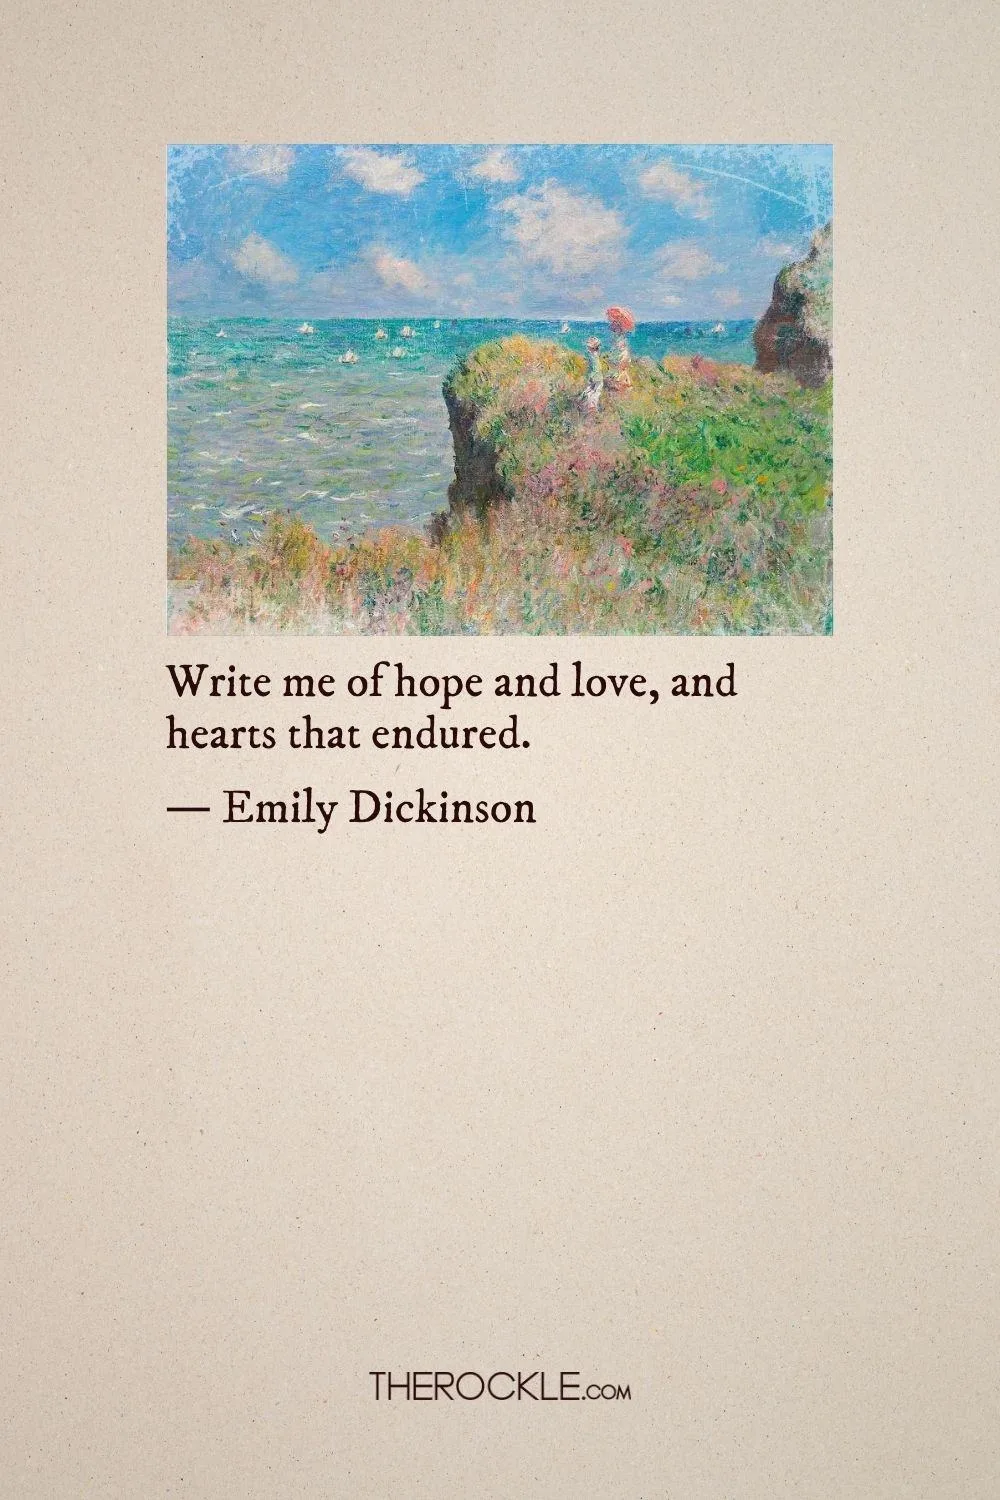 Emily Dickinson on resilient hearts